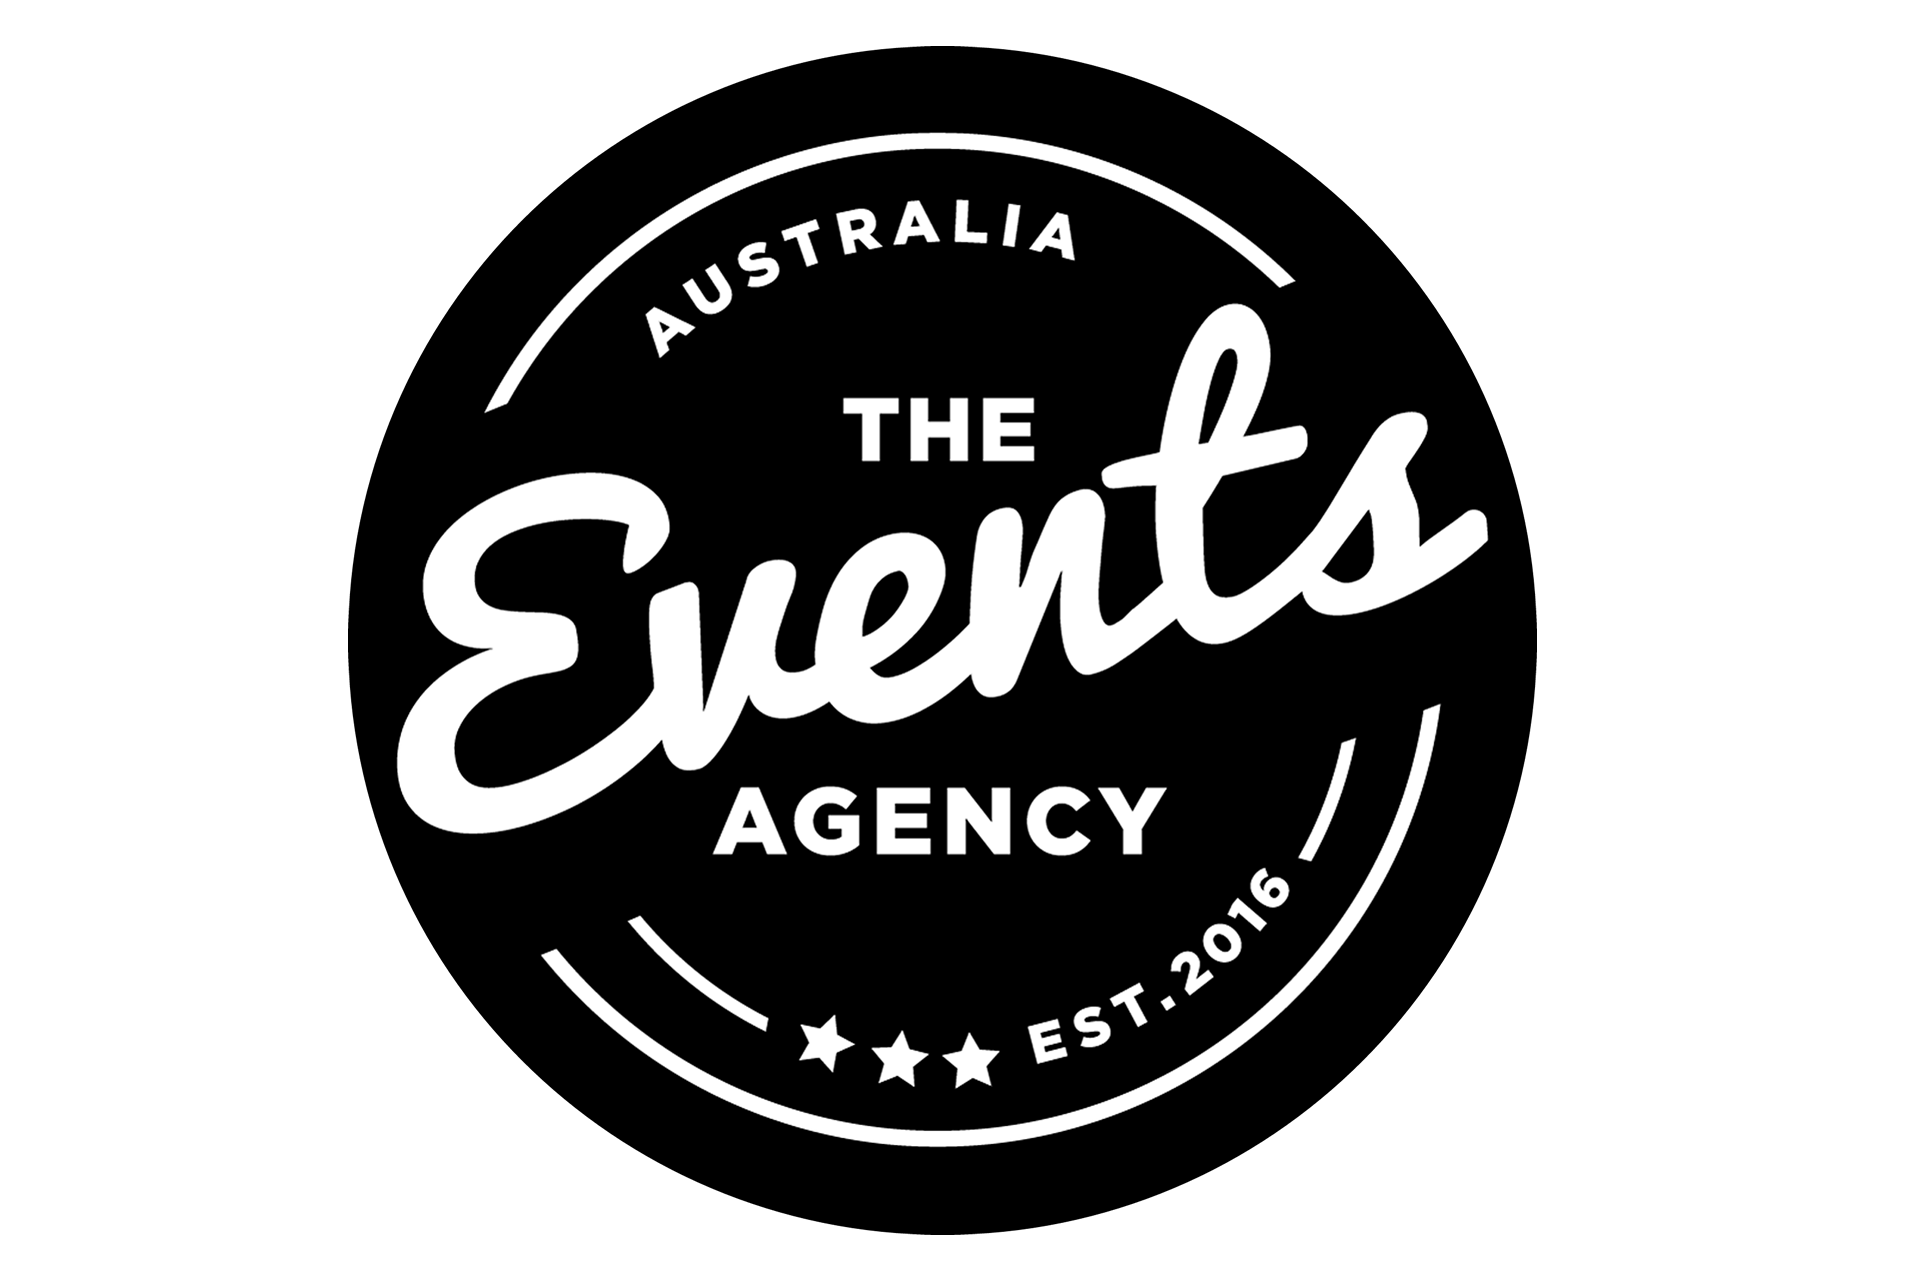 The Events Agency